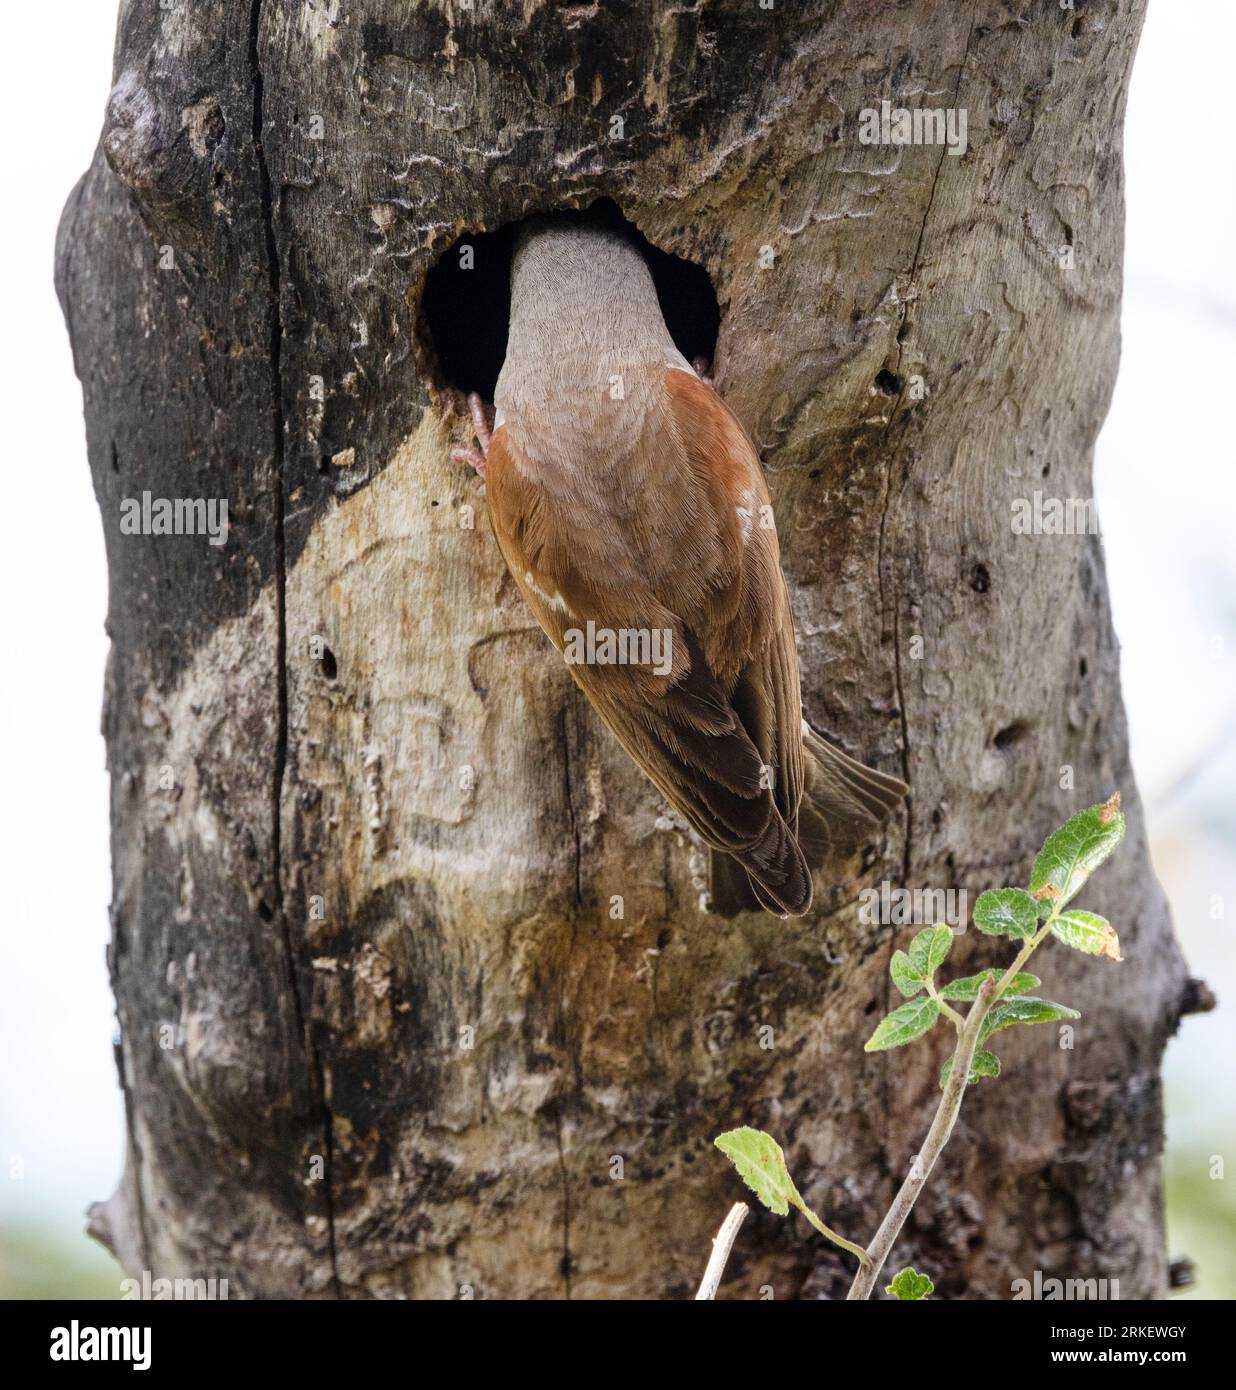 A Grey-headed Sparrow returns to an old Barbets nest hole in a soft wooded commiphora tree. They regularly use this nest hole rather than build. Stock Photo